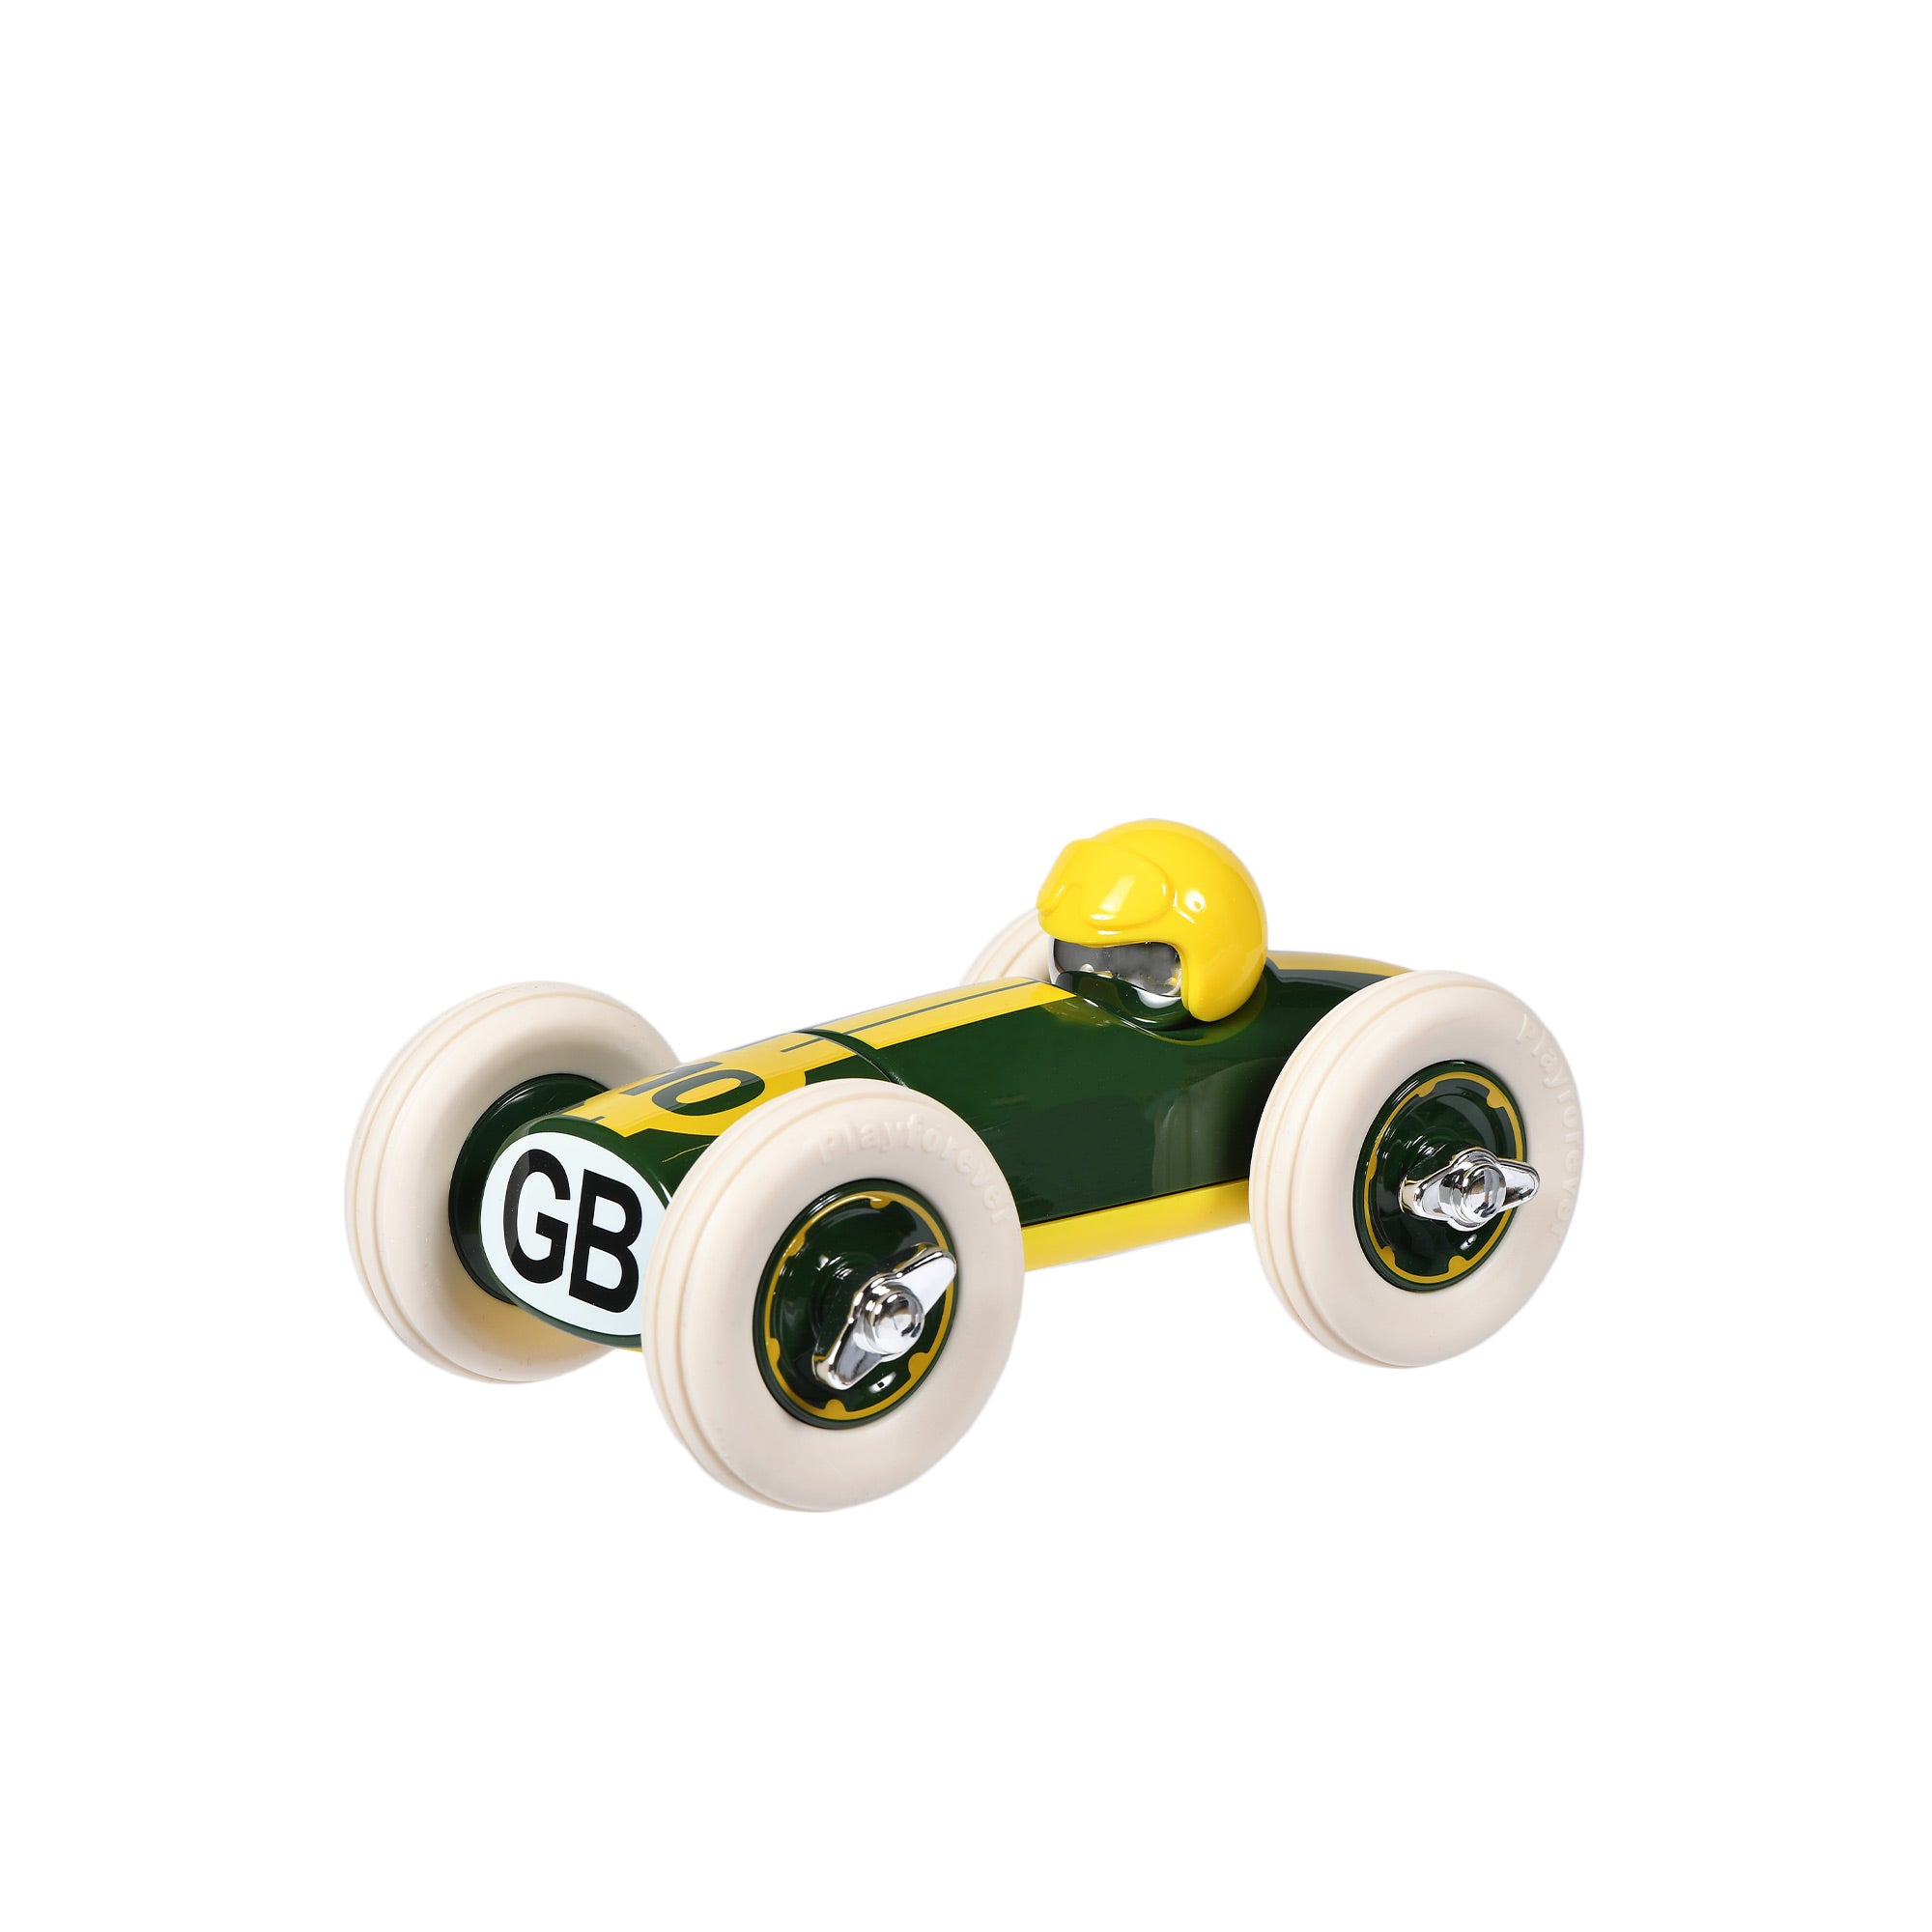 407 Bonnie GB - Green and Yellow Car image 2